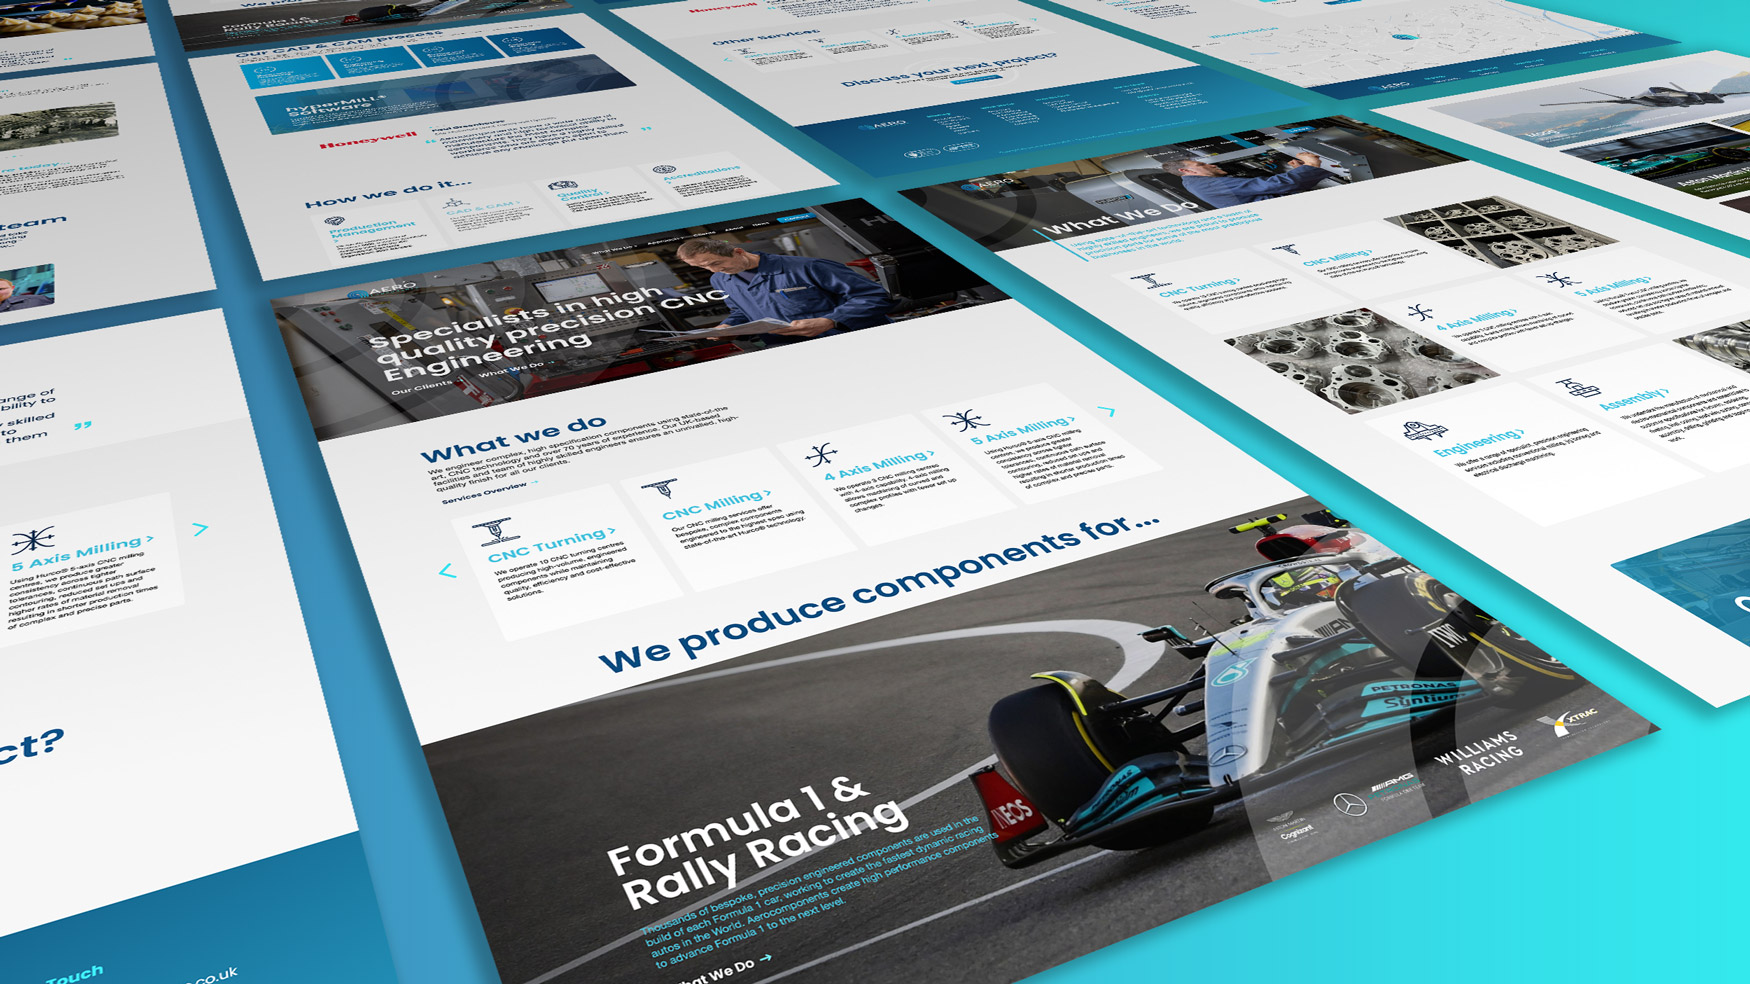 pages displaying aerocomponents bespoke website design